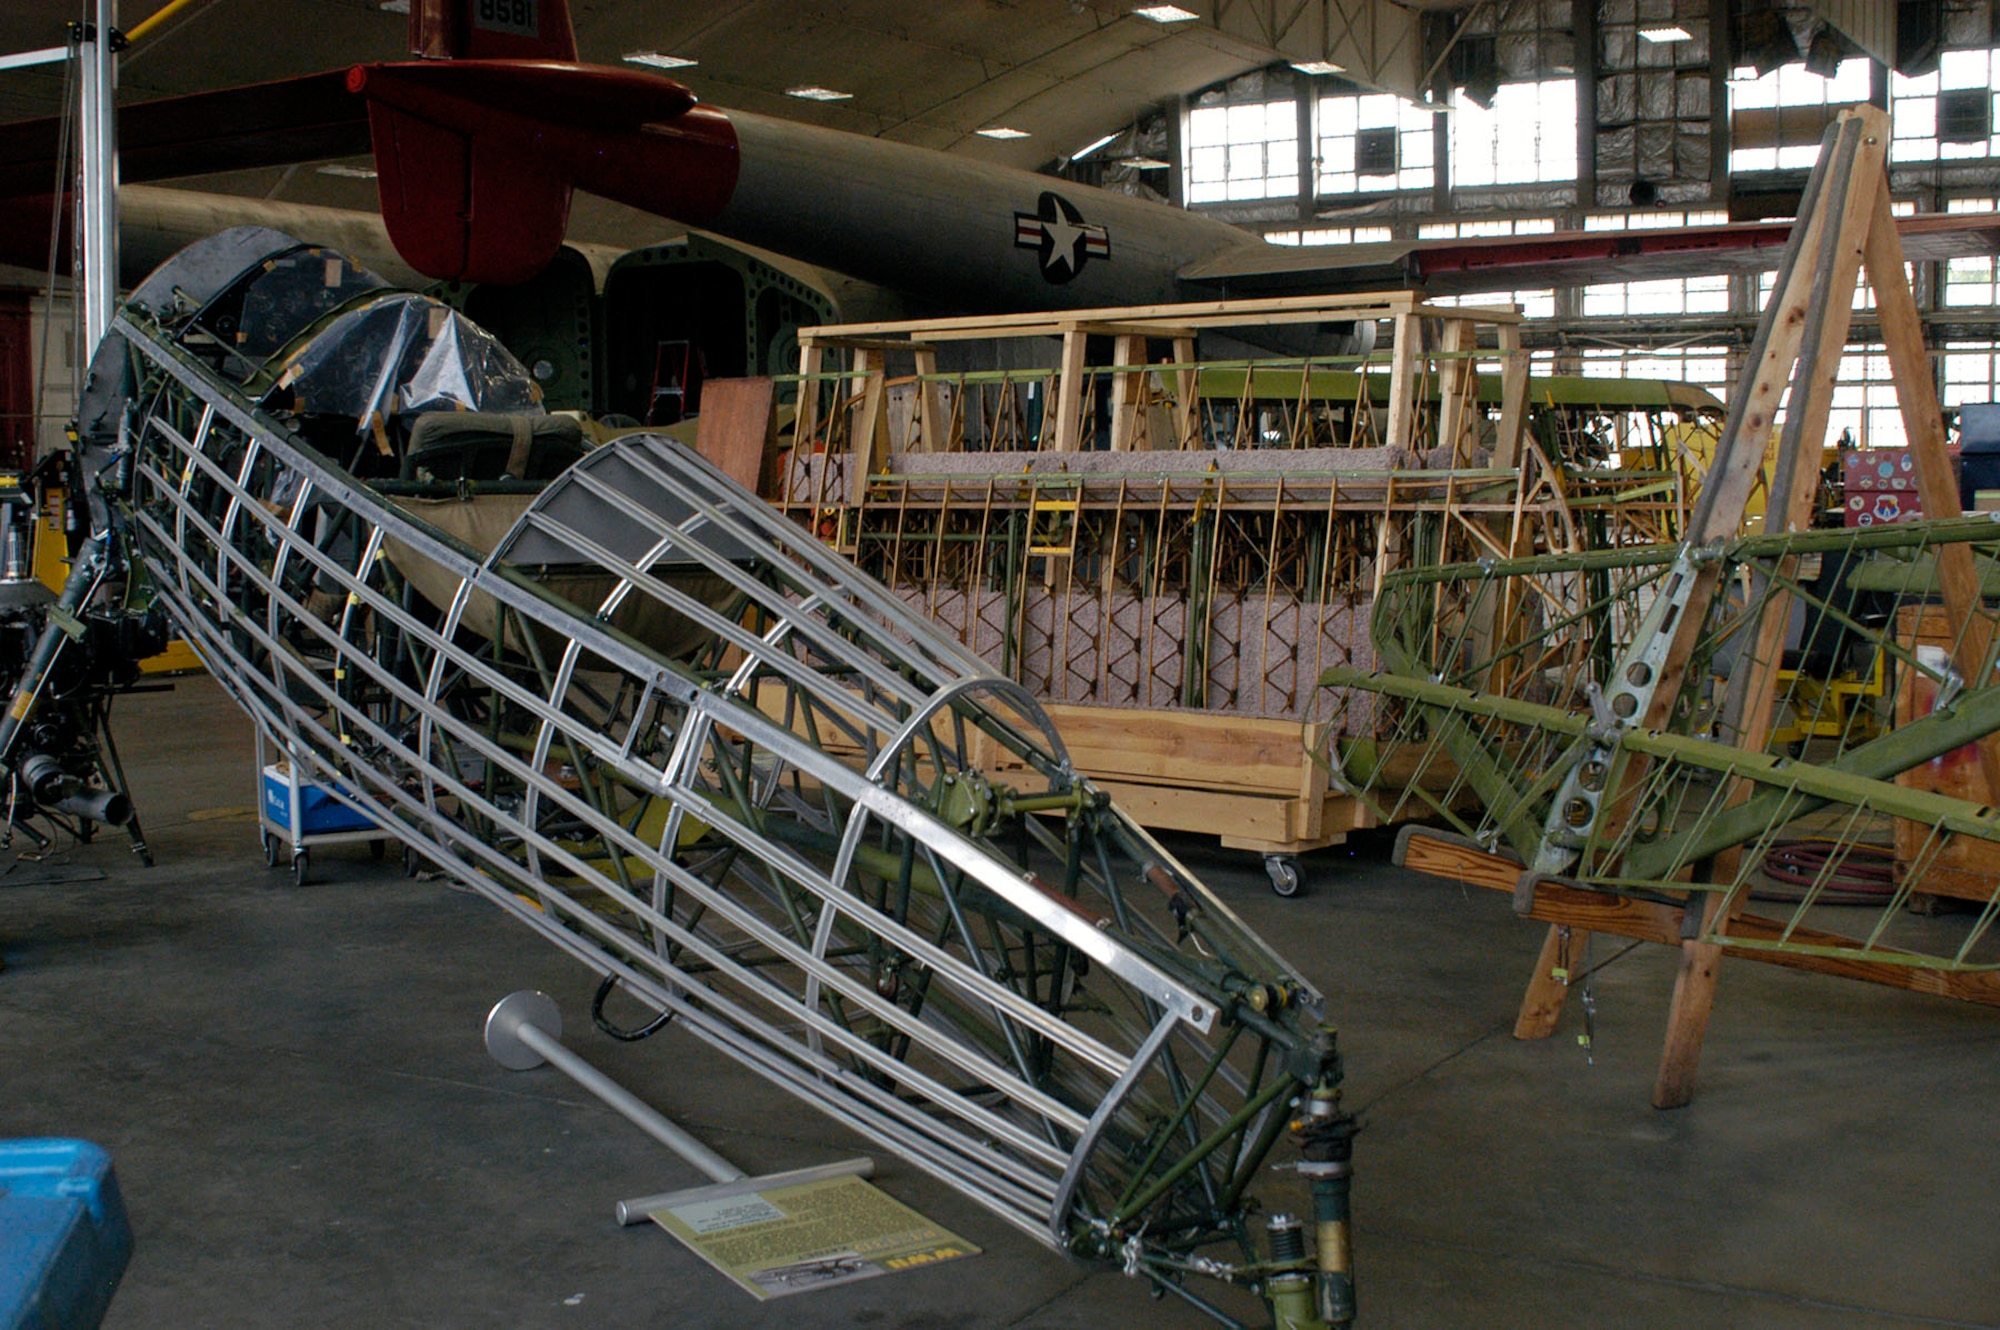 DAYTON, Ohio (08/2013) -- The Stearman PT-13D Kaydet is undergoing restoration. Plans call for the aircraft to be part of an expanded Tuskegee Airman exhibit in the World War II Gallery at the National Museum of the U.S. Air Force. (U.S. Air Force photo)